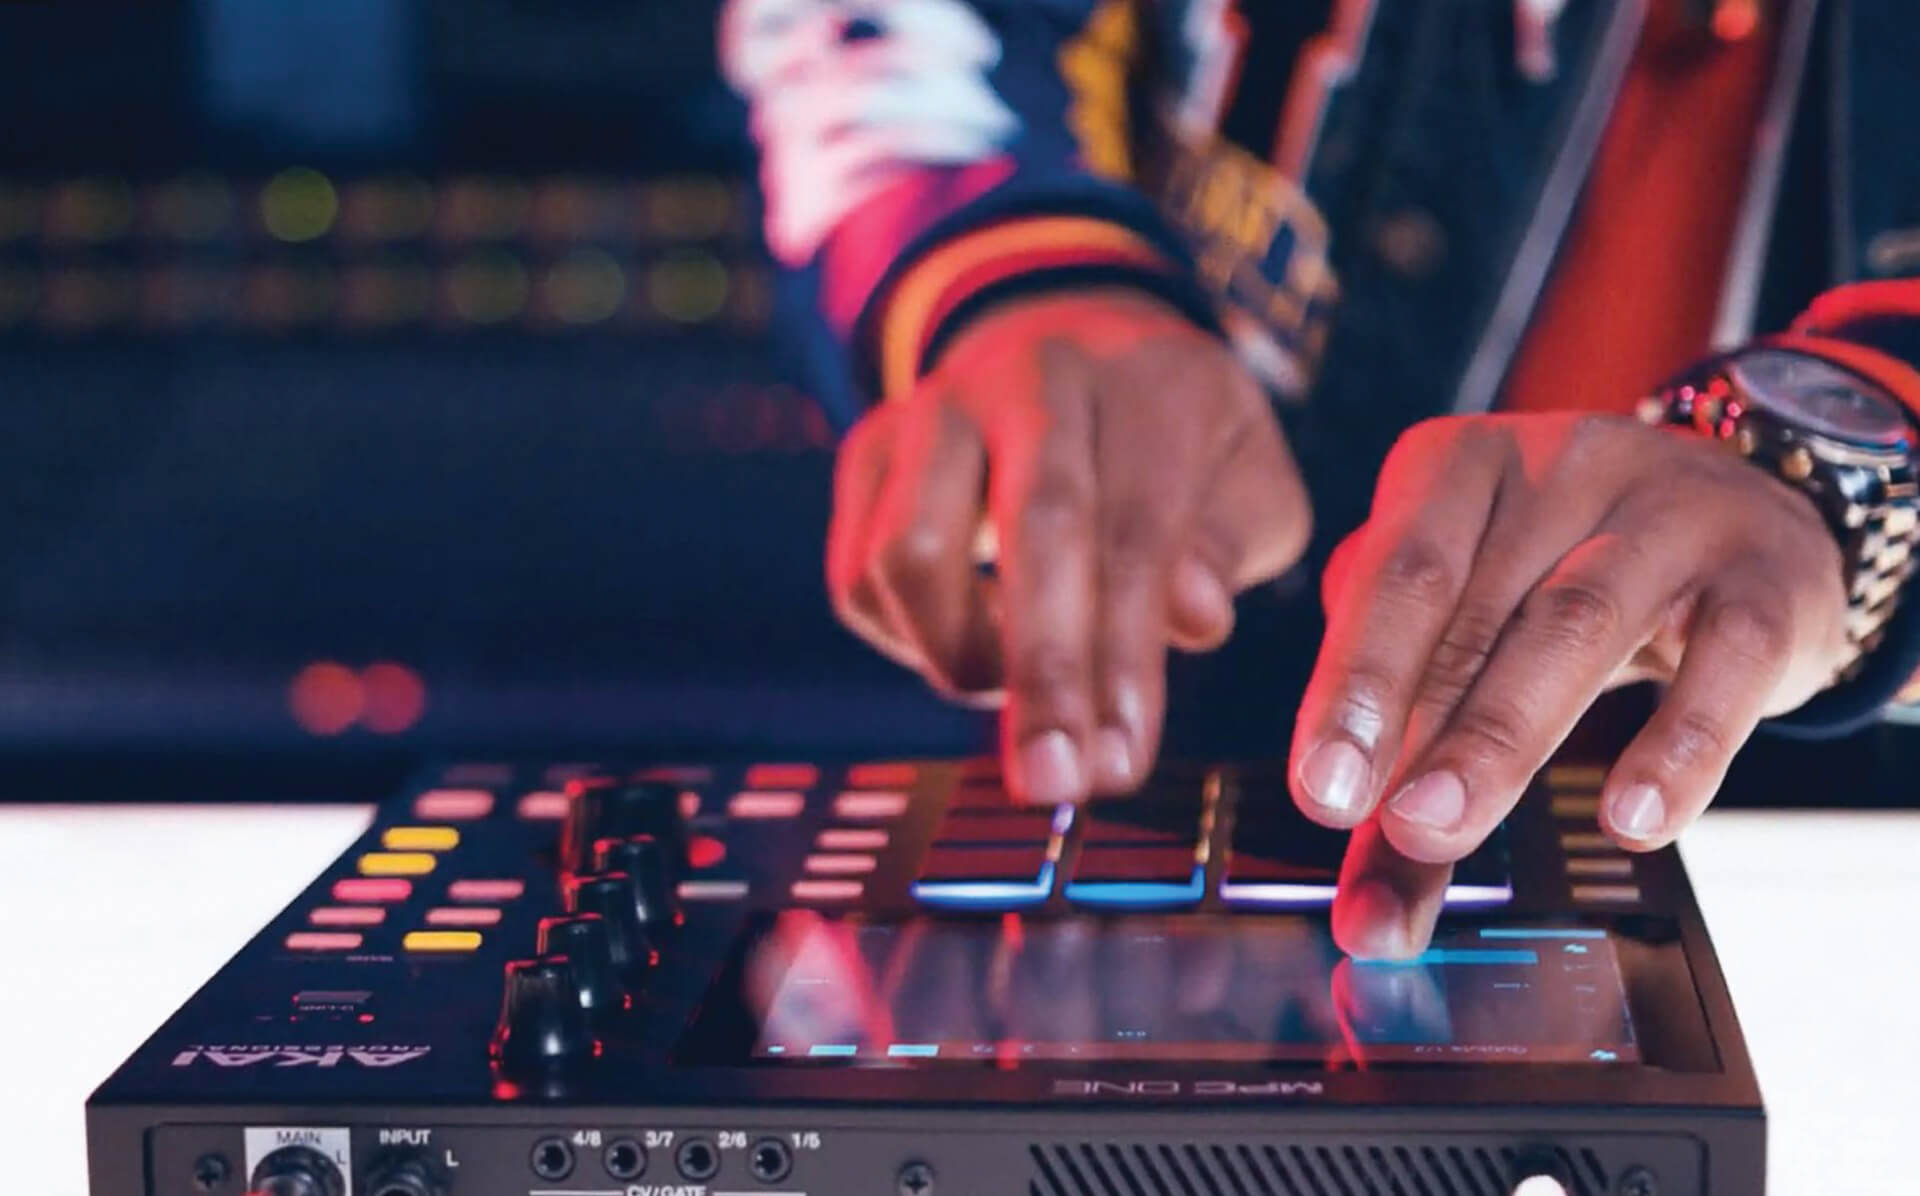 4 Reasons Singer/Songwriters Should Consider an MPC. Yes, an MPC.